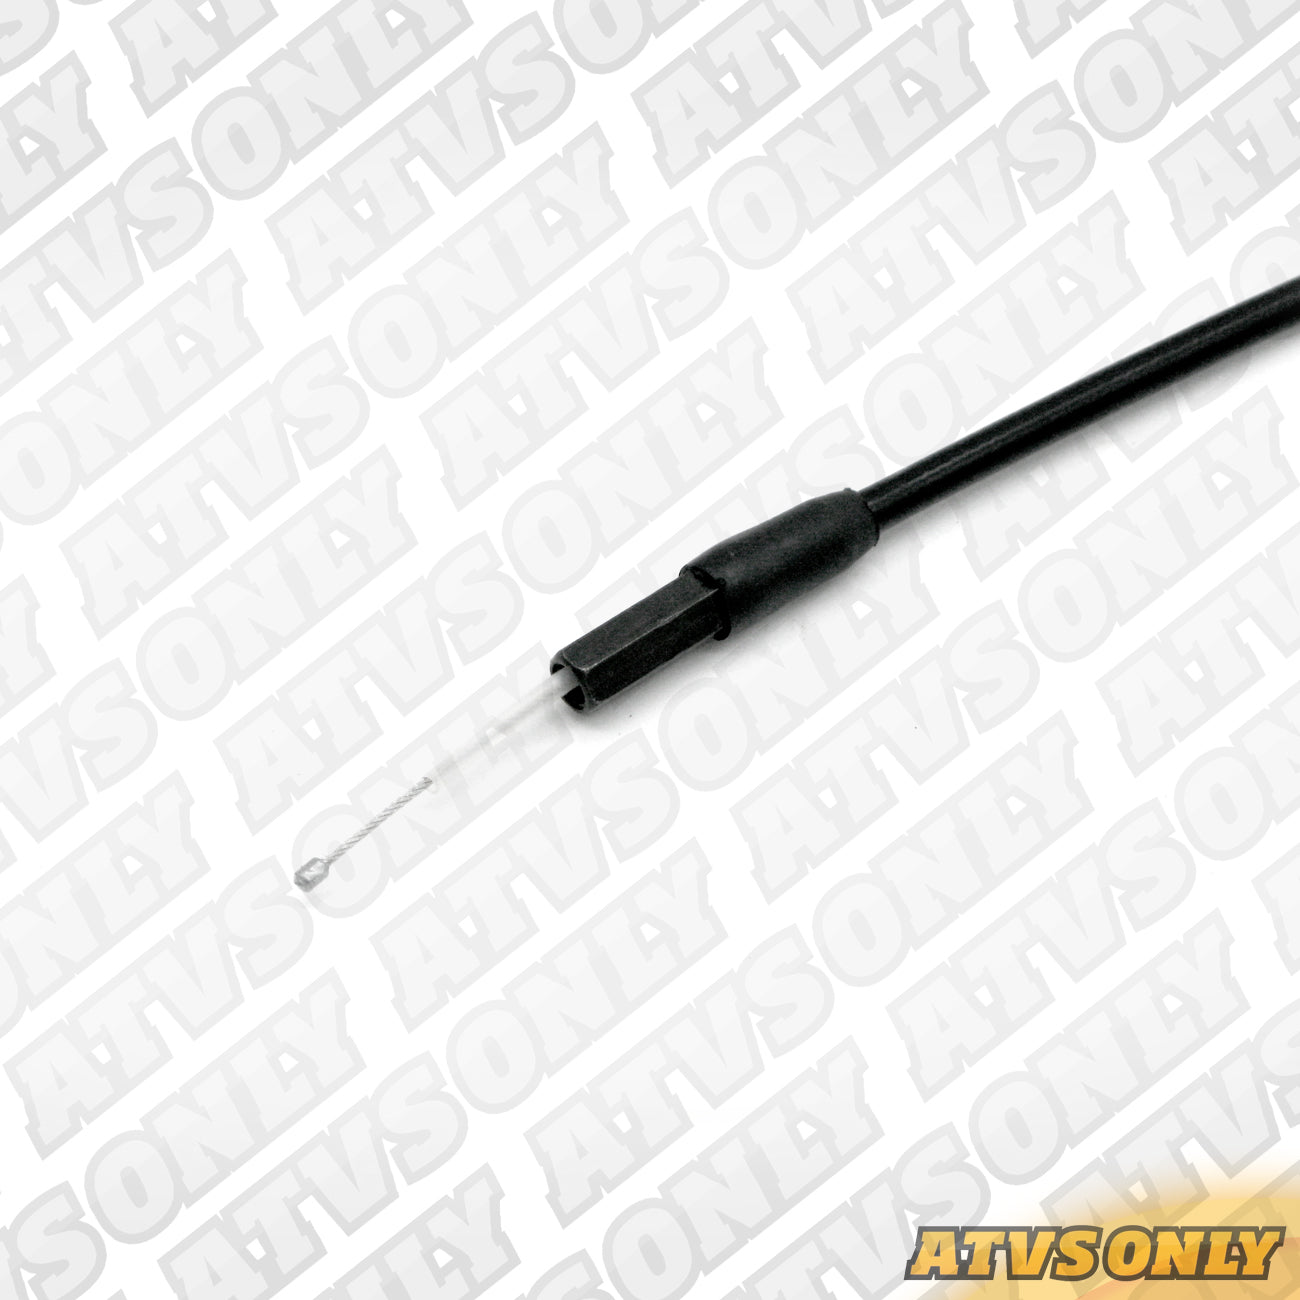 Cables - Throttle Cable (Thumb) for Yamaha Raptor 700